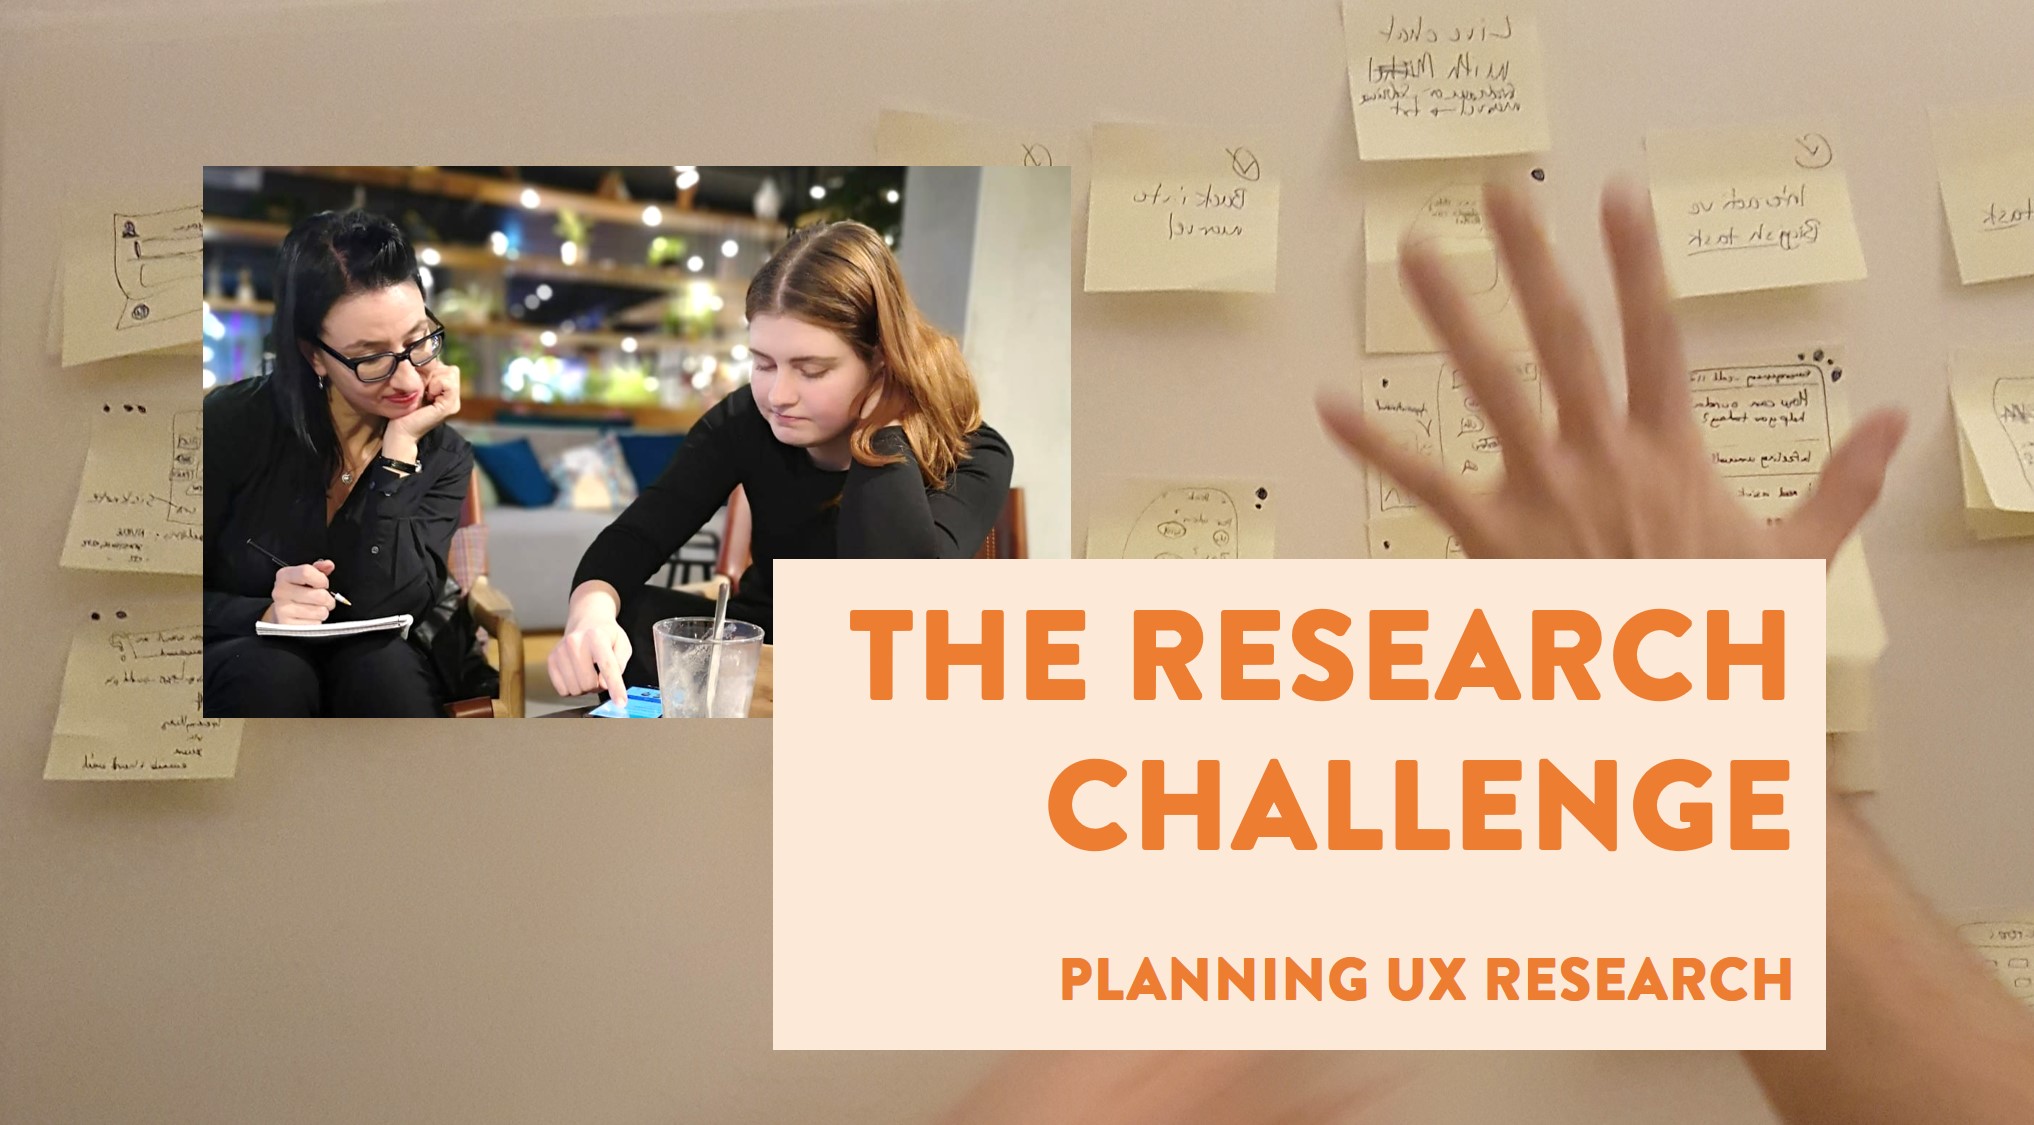 The Research Challenge Workshop